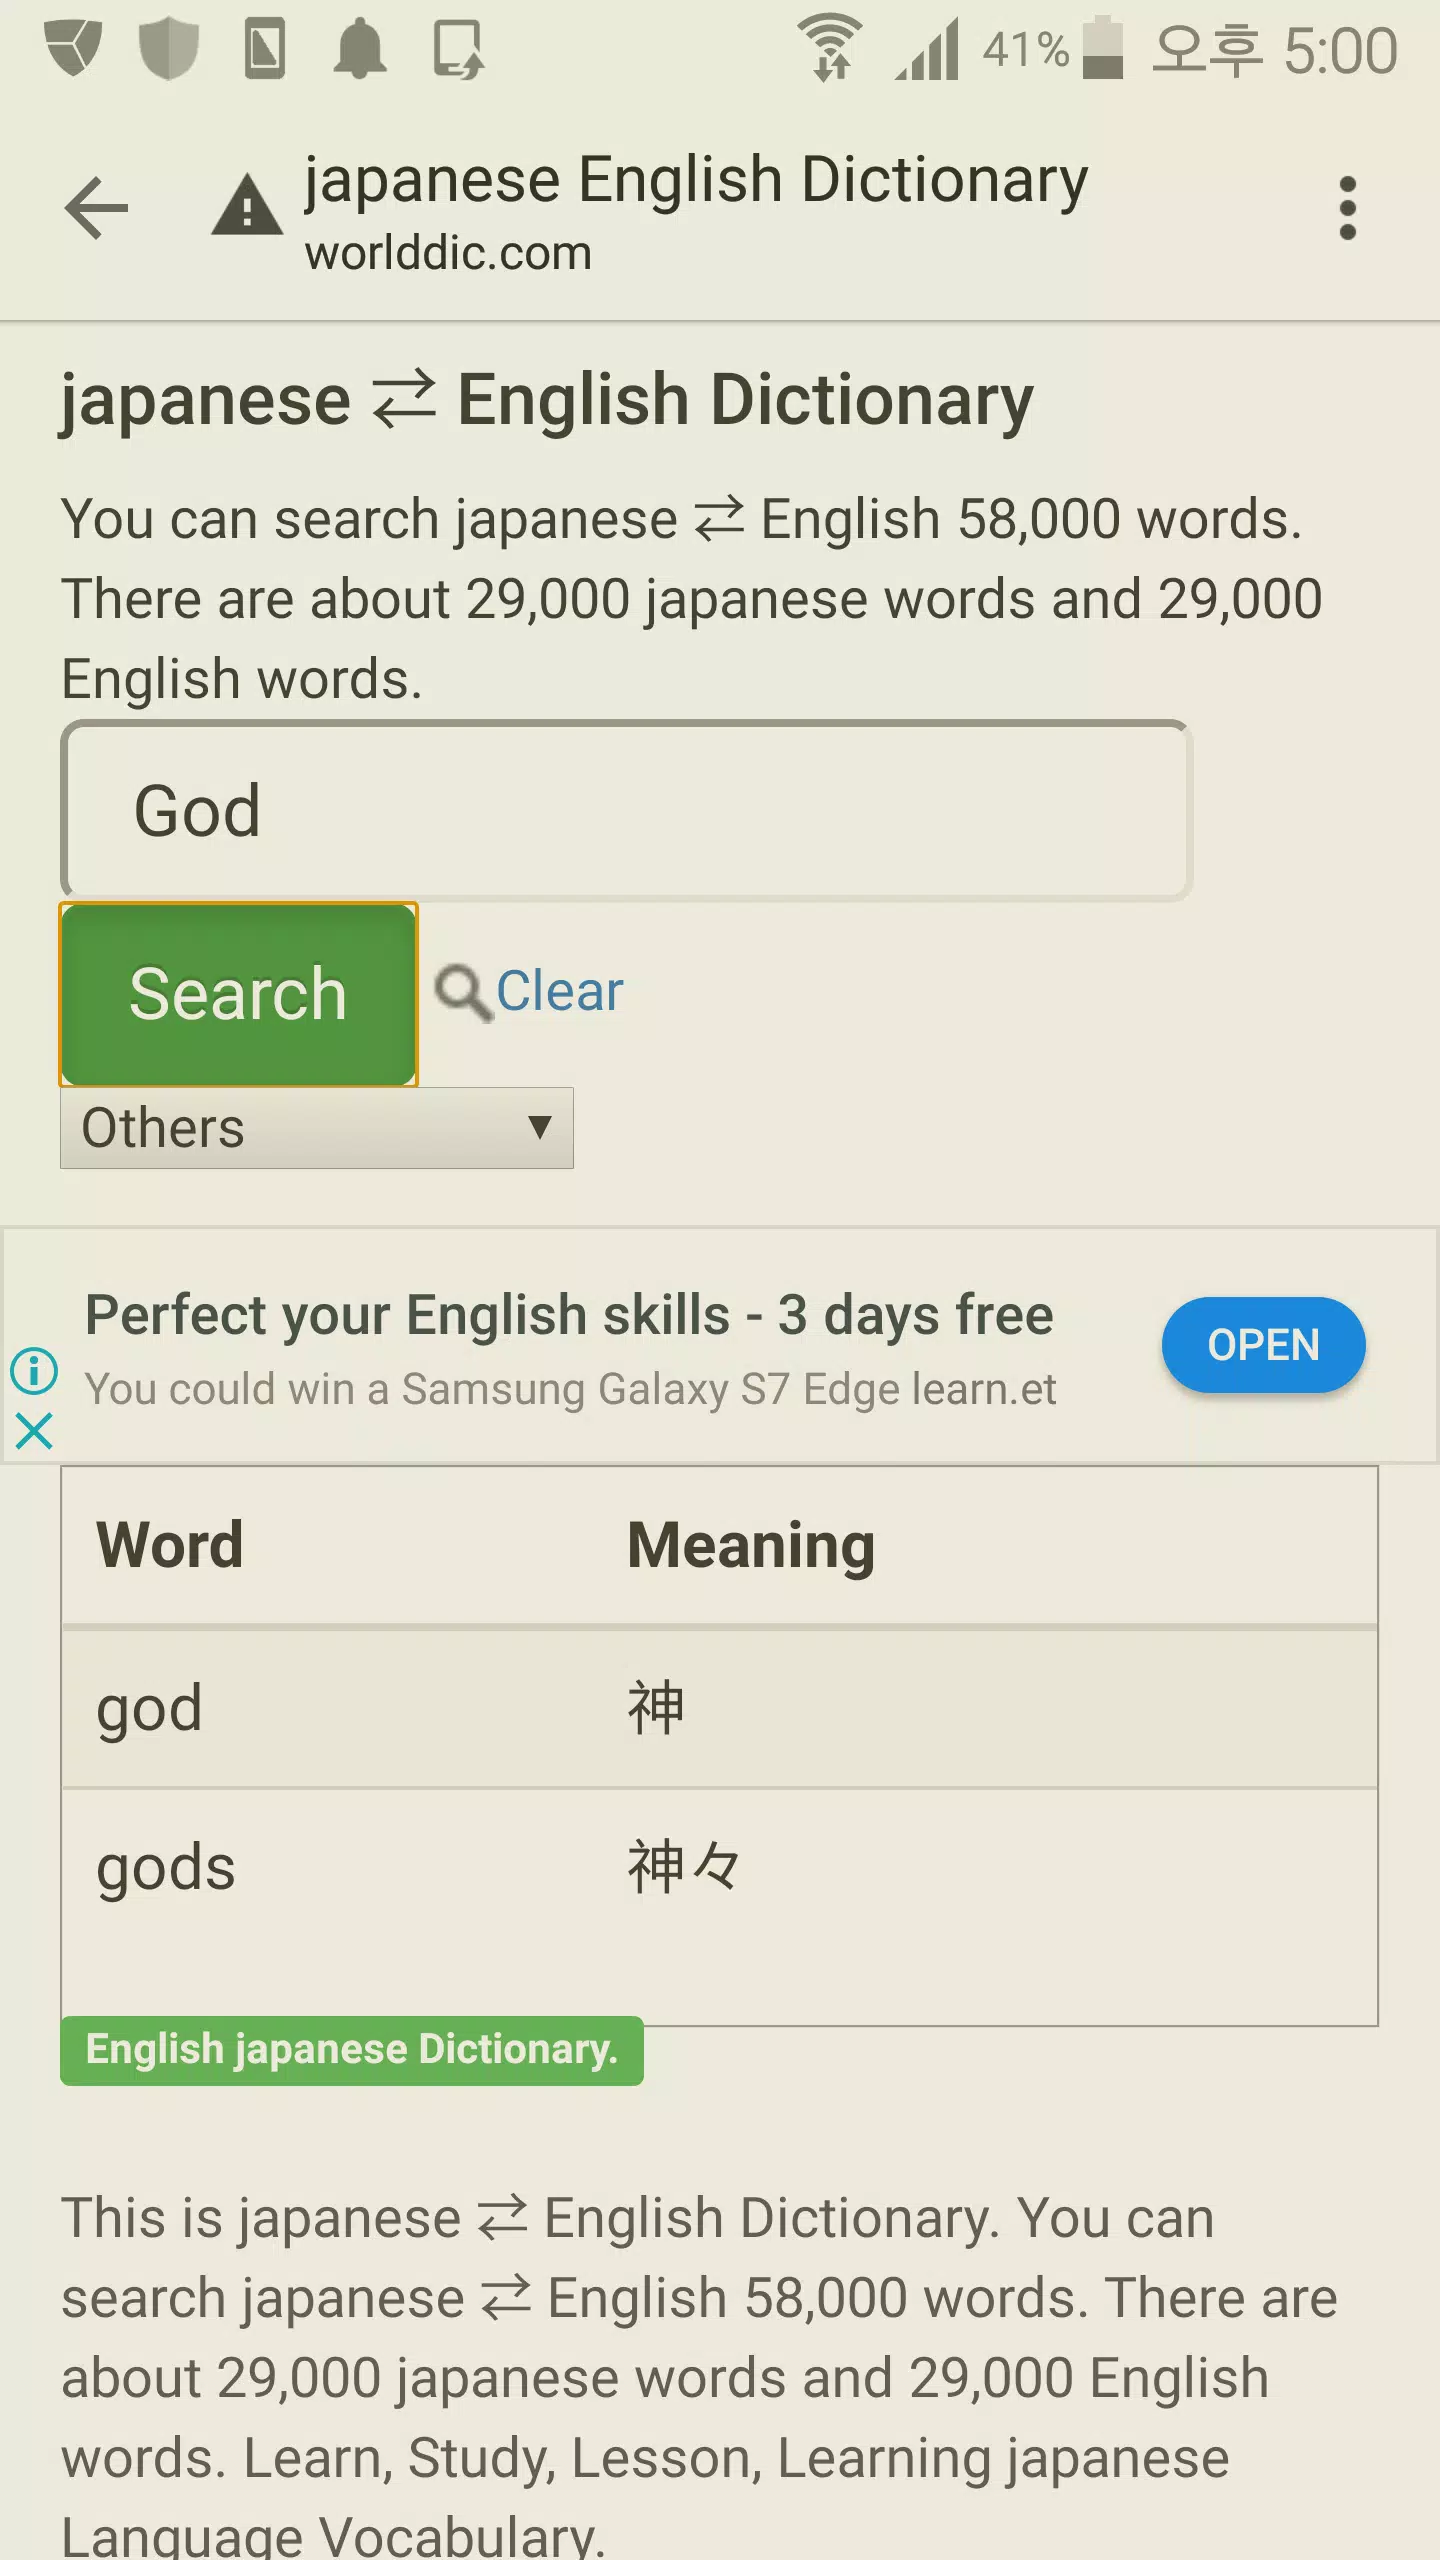 Japanese to English Dictionary for Android - APK Download